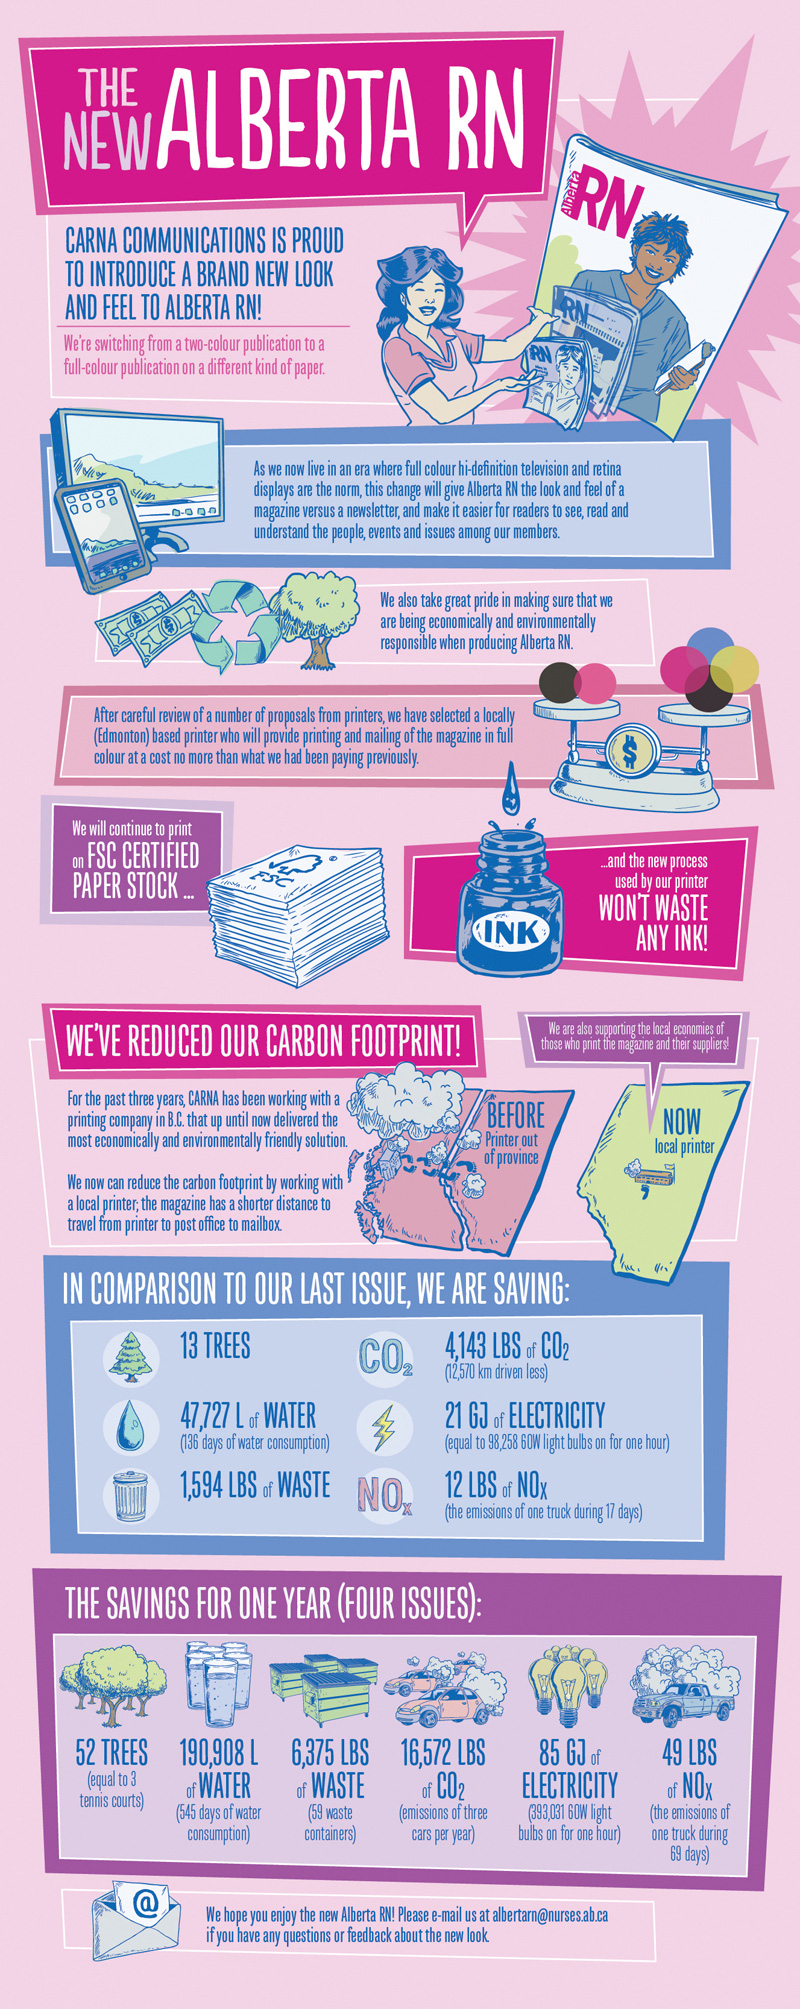 The-new-Alberta-RN-InfographicTall_20130918